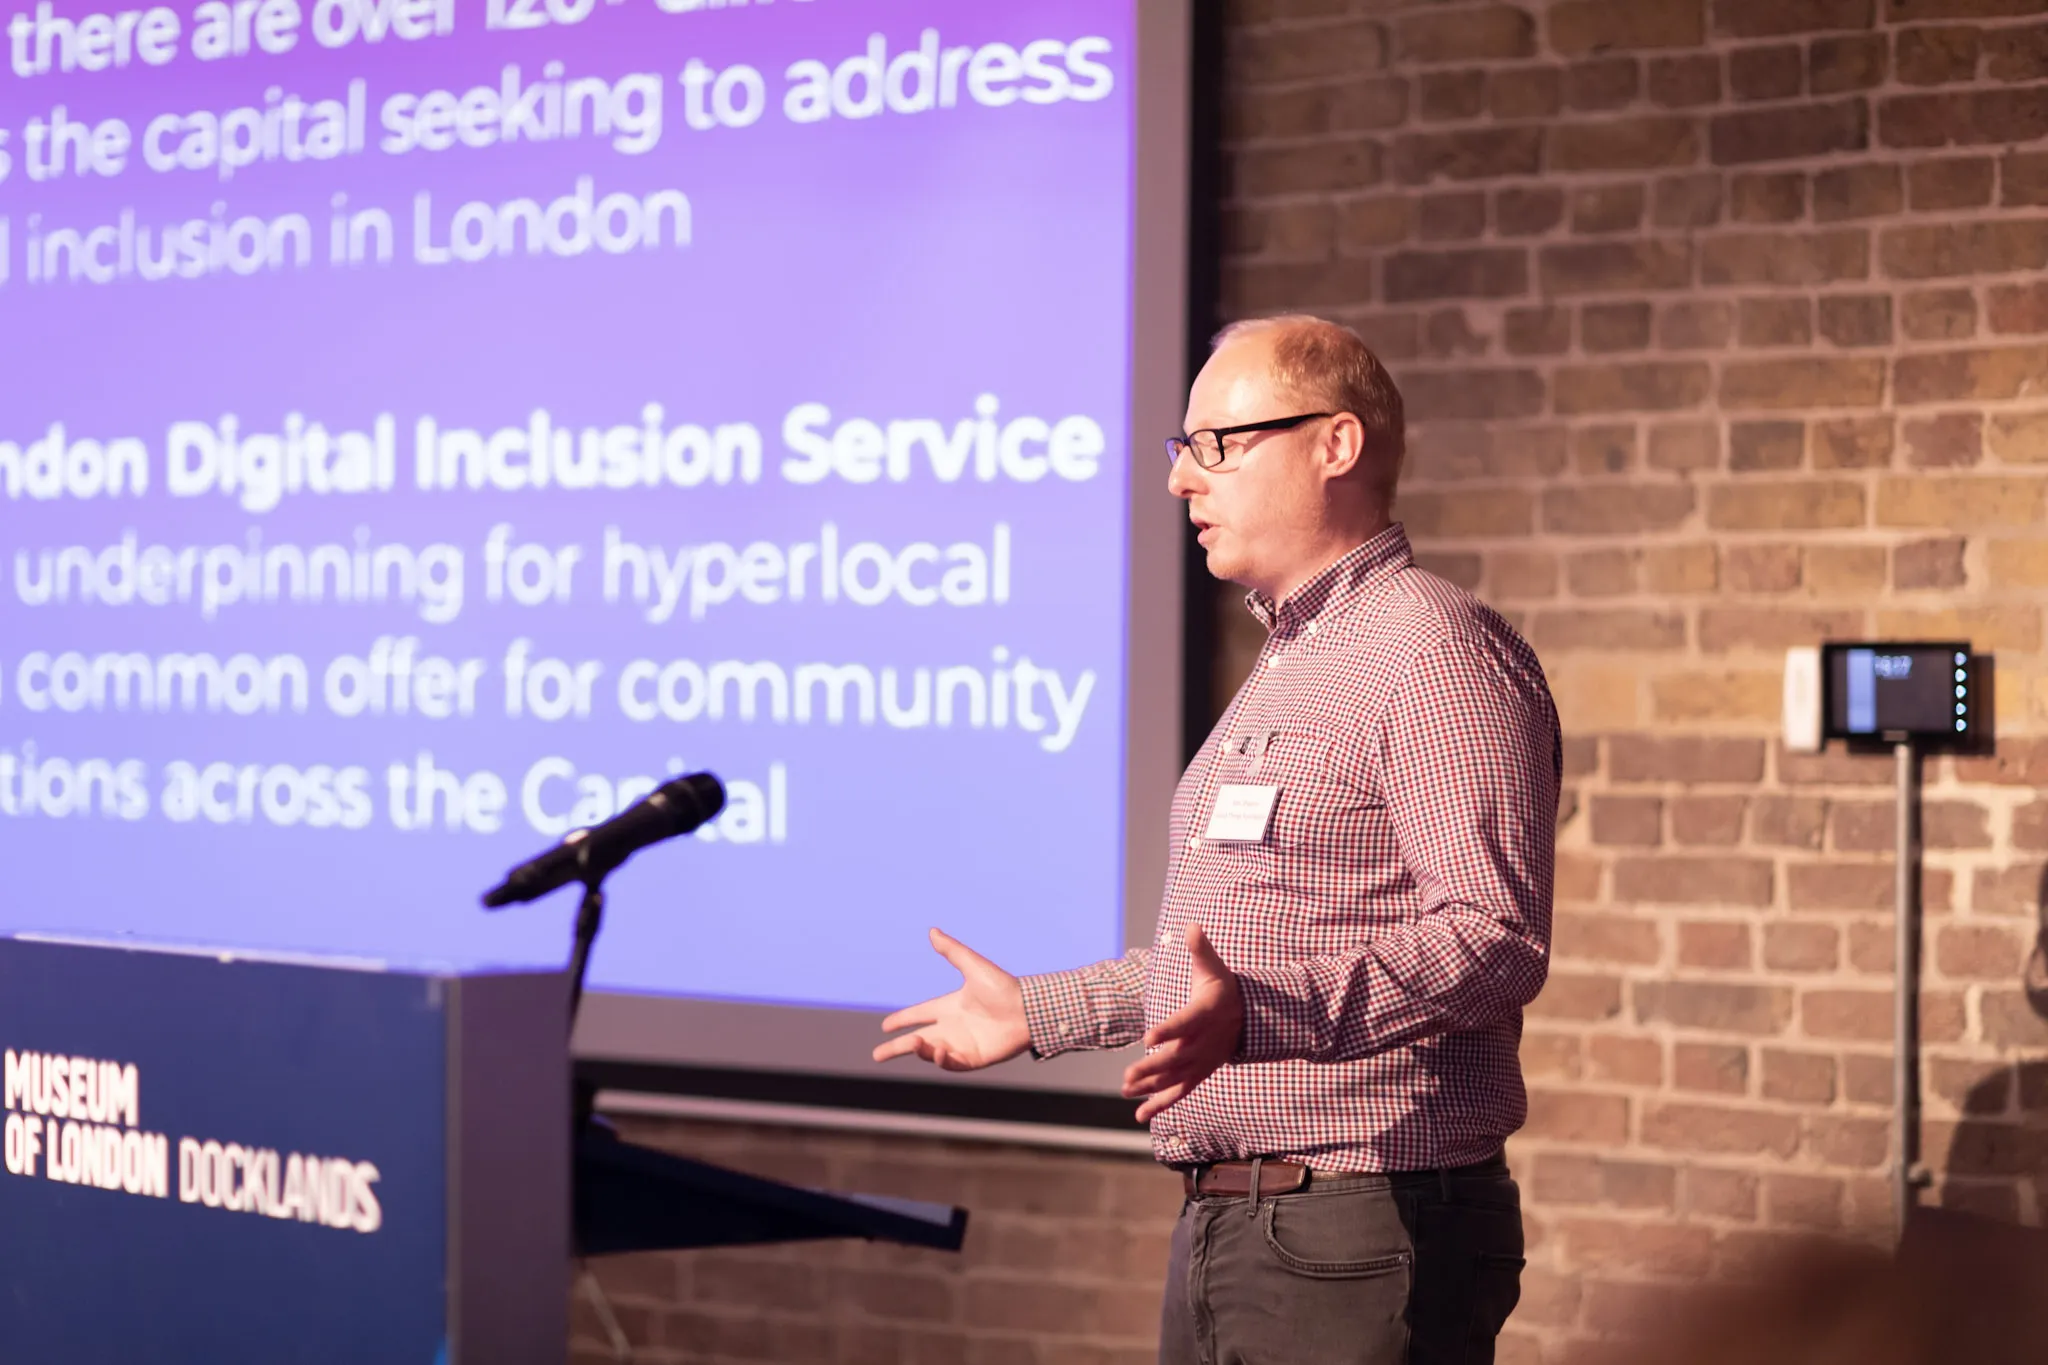 Rob Shapiro from Good Things Foundation announcing our plans for a new digital inclusion service for London